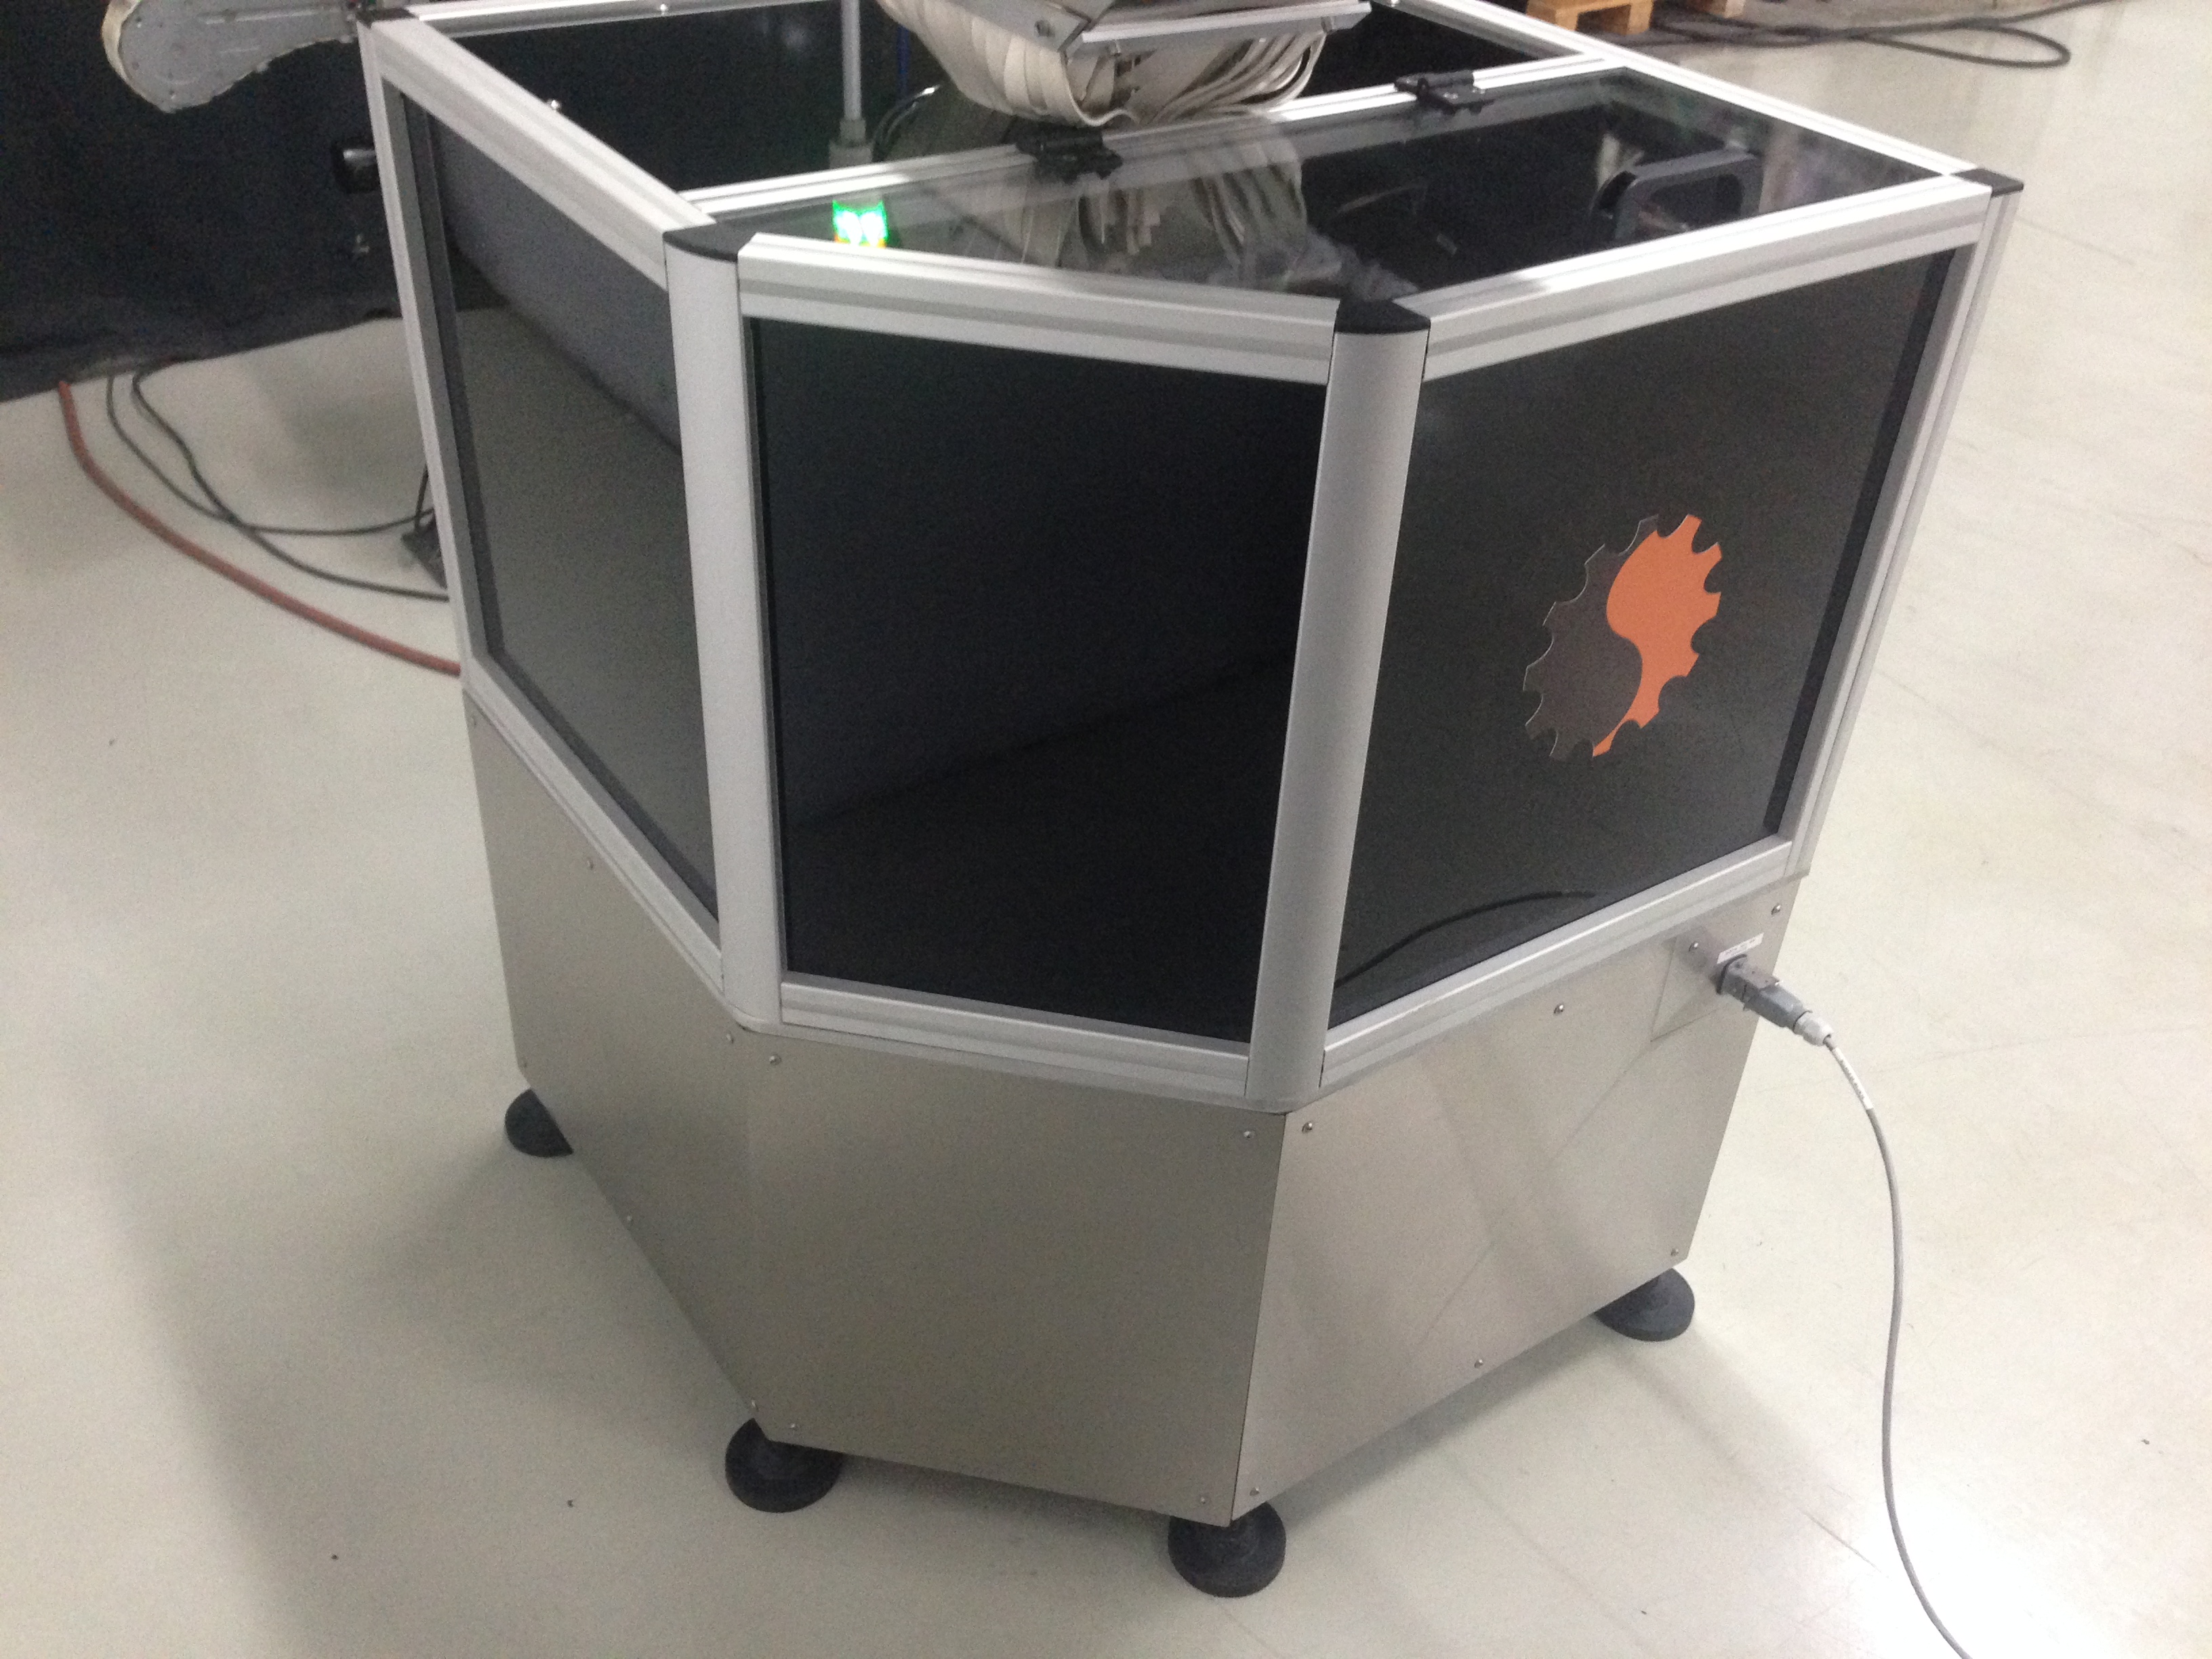 New PCM comb feeder with centrifugal sorting bowl, elevator-hopper and starwheel indexing system